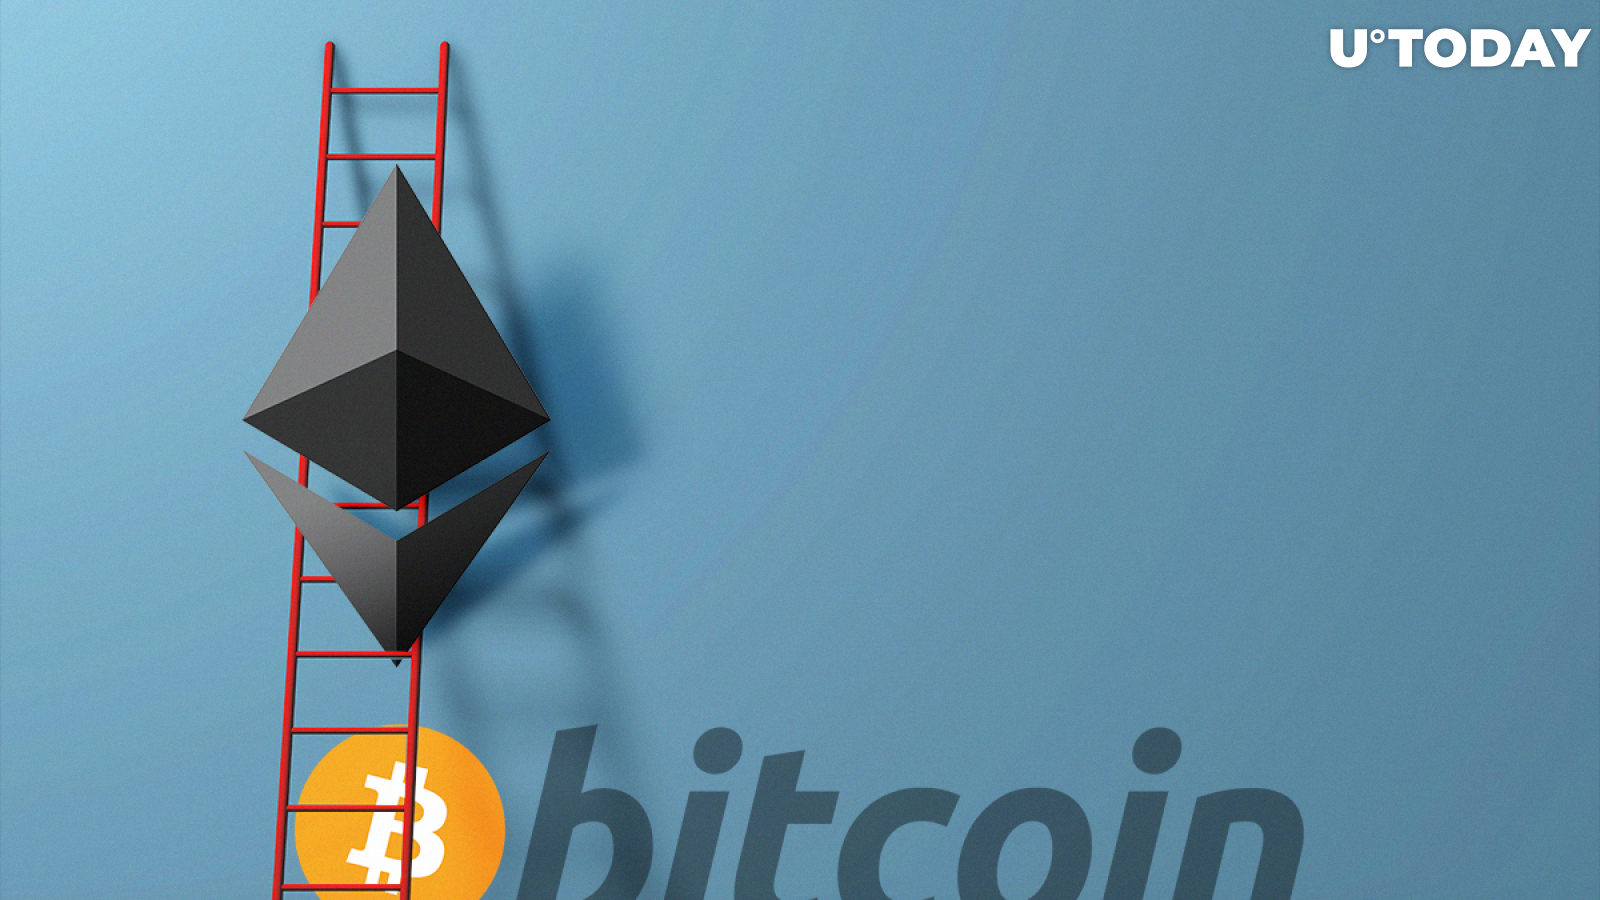 Ethereum (ETH) Could End Up Overshadowing Bitcoin (BTC) in 2020